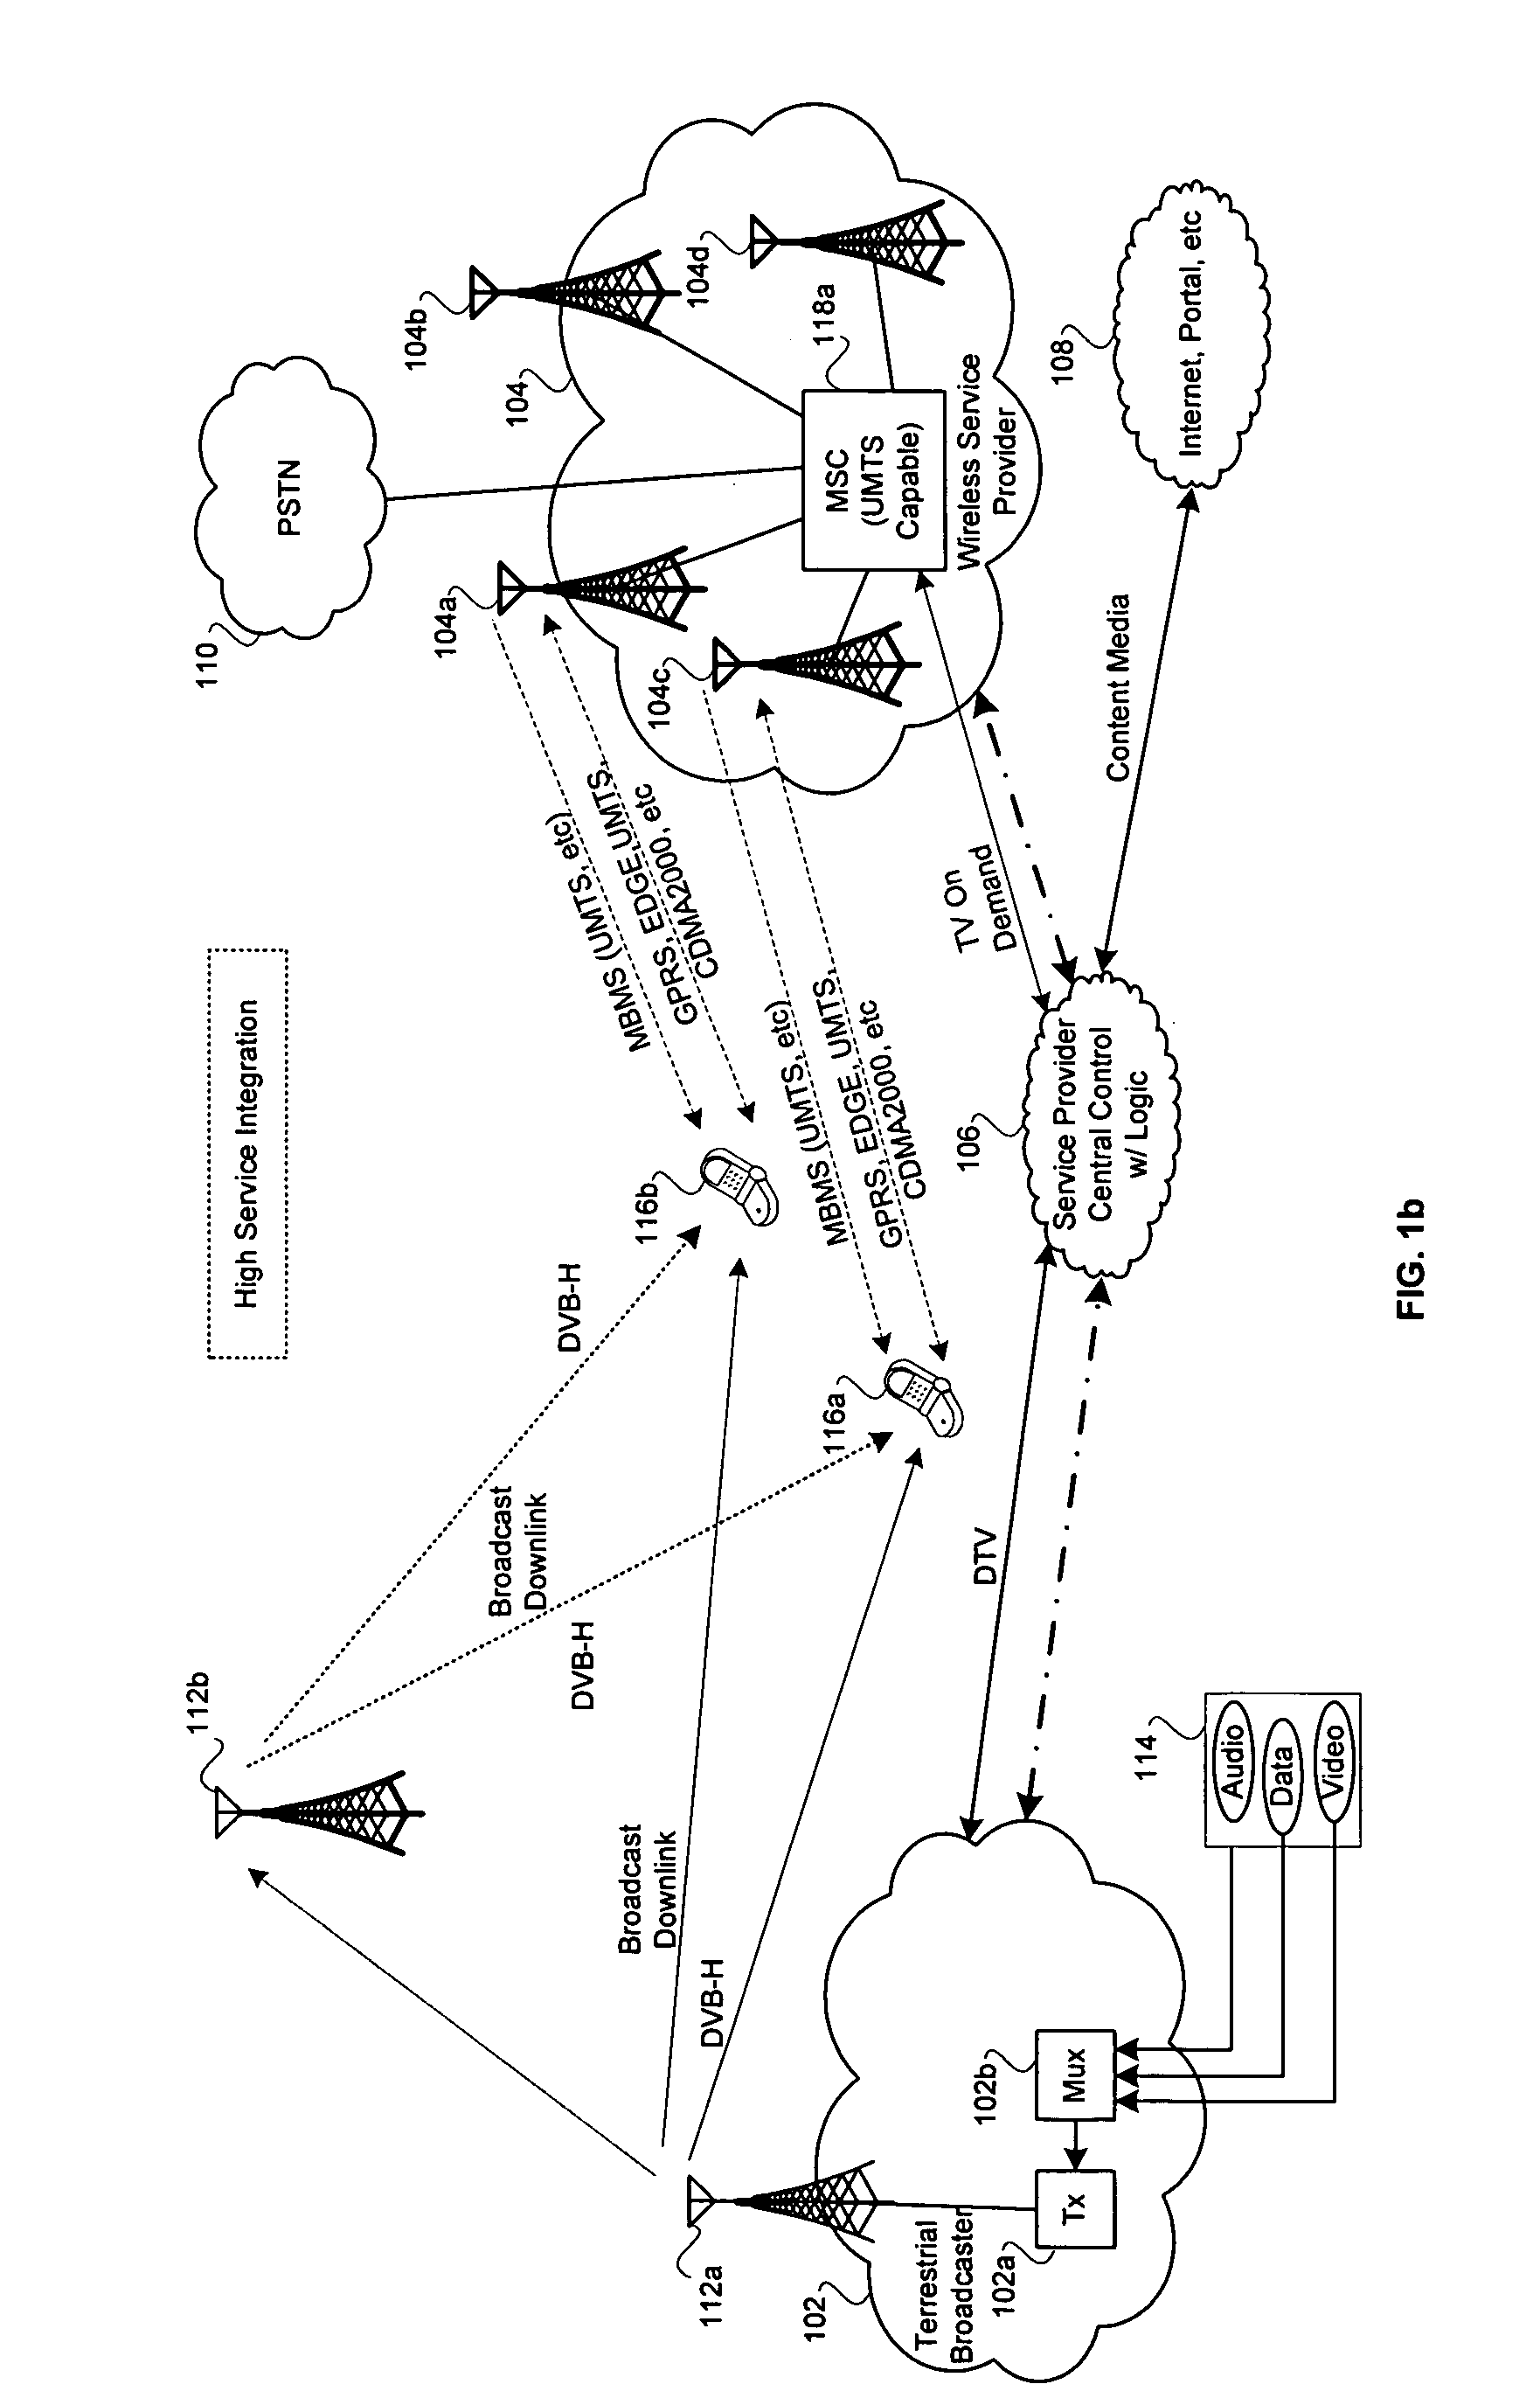 Method and system for mobile receiver antenna architecture for world band cellular and broadcasting services